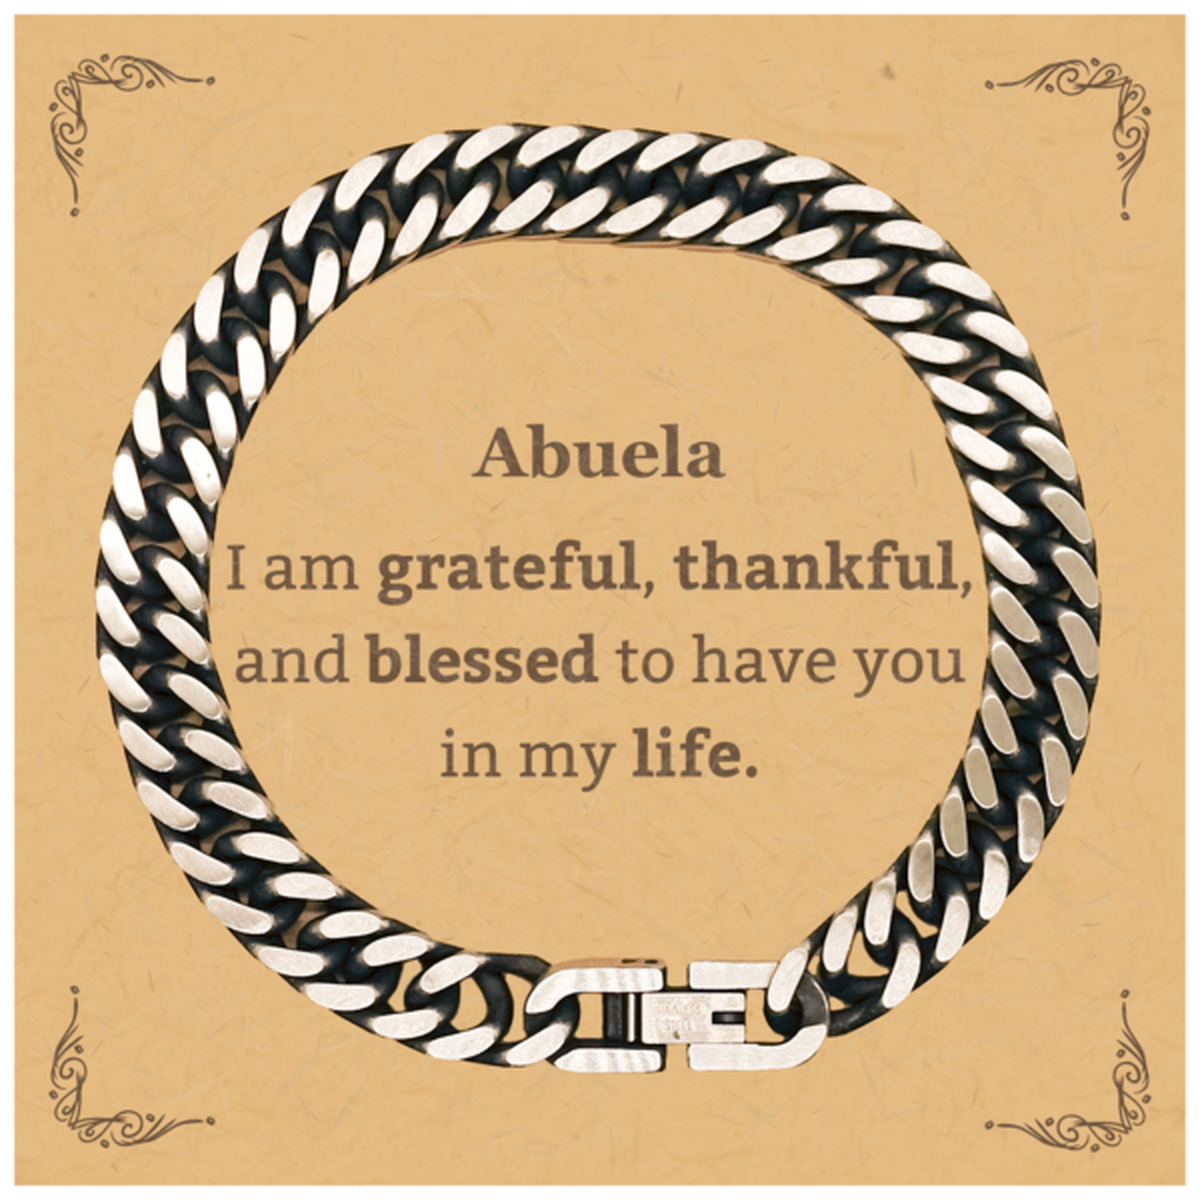 Abuela Appreciation Gifts, I am grateful, thankful, and blessed, Thank You Cuban Link Chain Bracelet for Abuela, Birthday Inspiration Gifts for Abuela